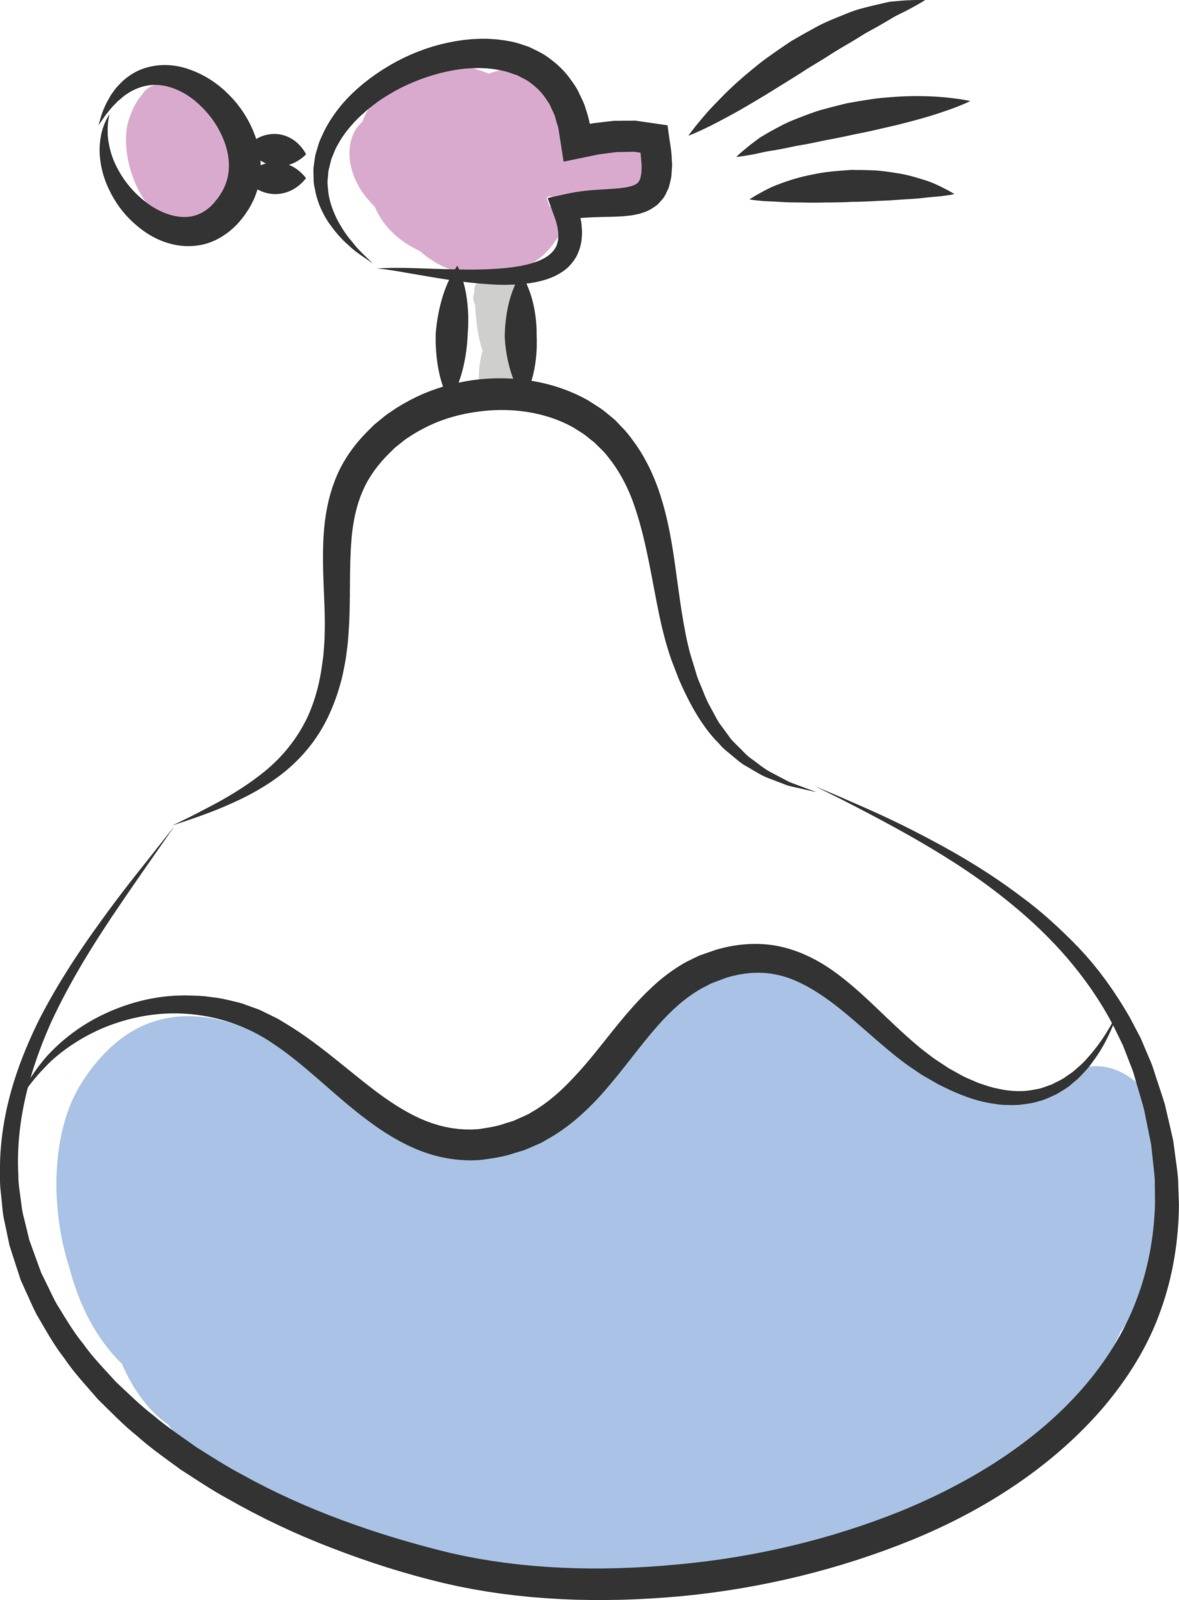 Classic perfume bottle with purple-colored spray atomizer contains blue-colored perfume vector color drawing or illustration 